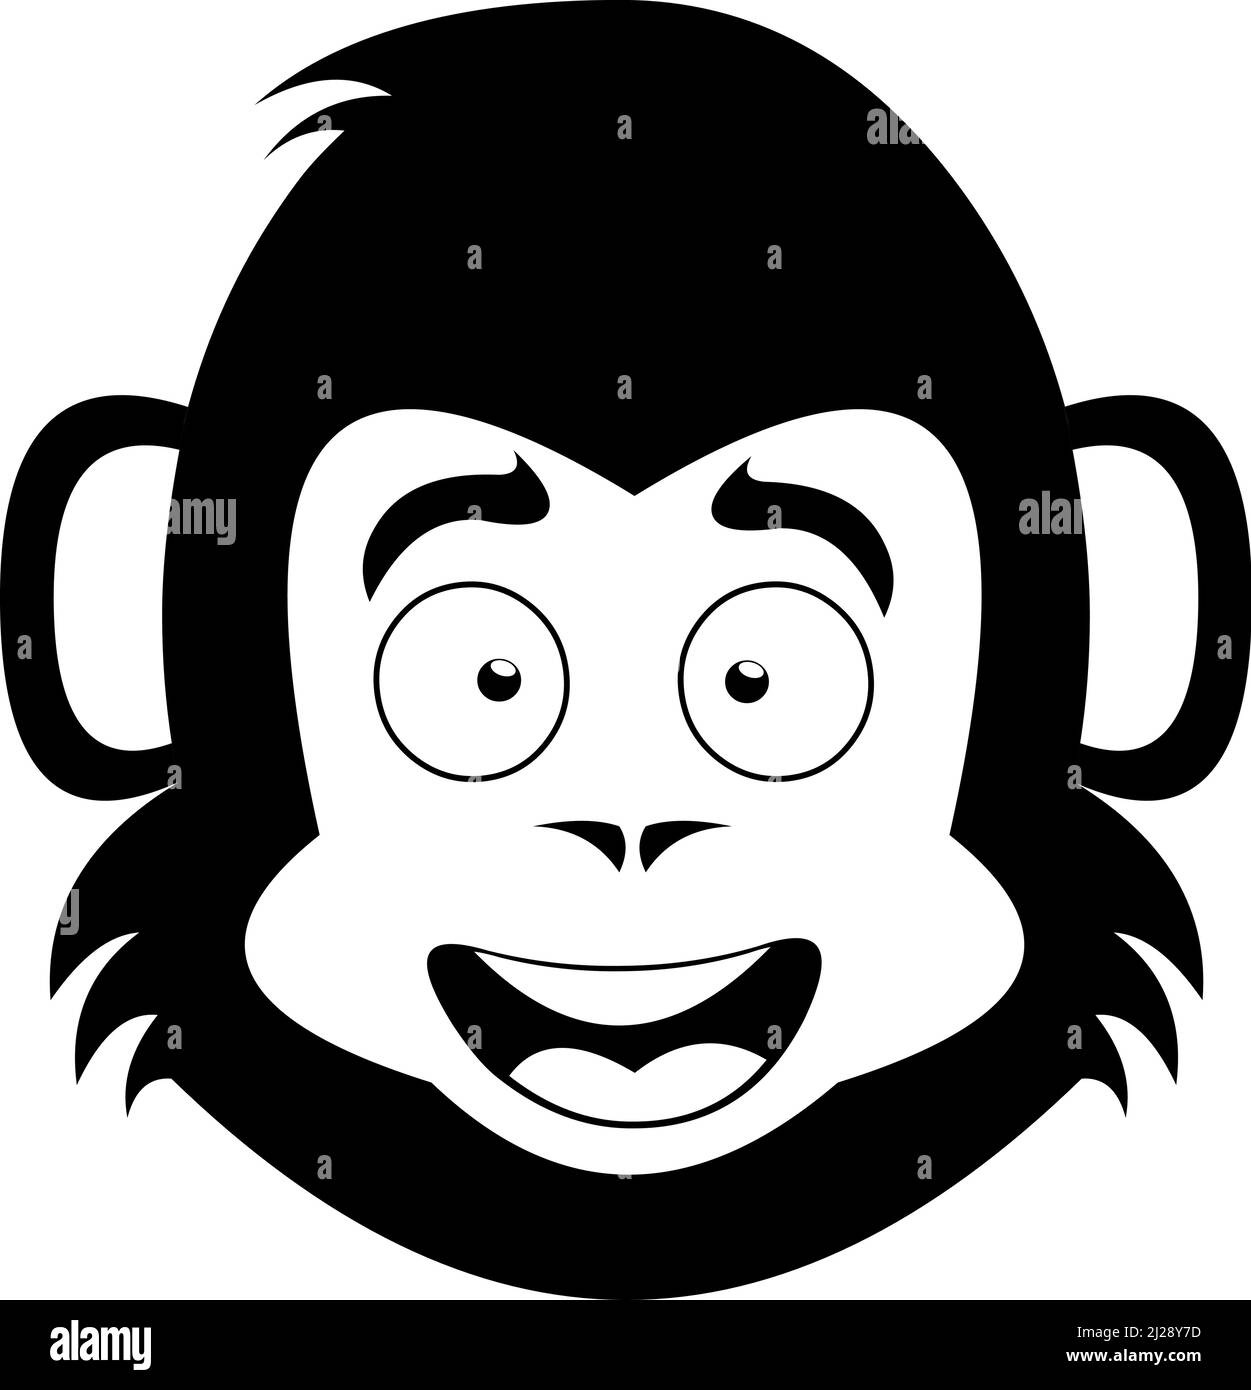 Vector illustration of the face of a monkey or gorilla cartoon drawn in black and white Stock Vector